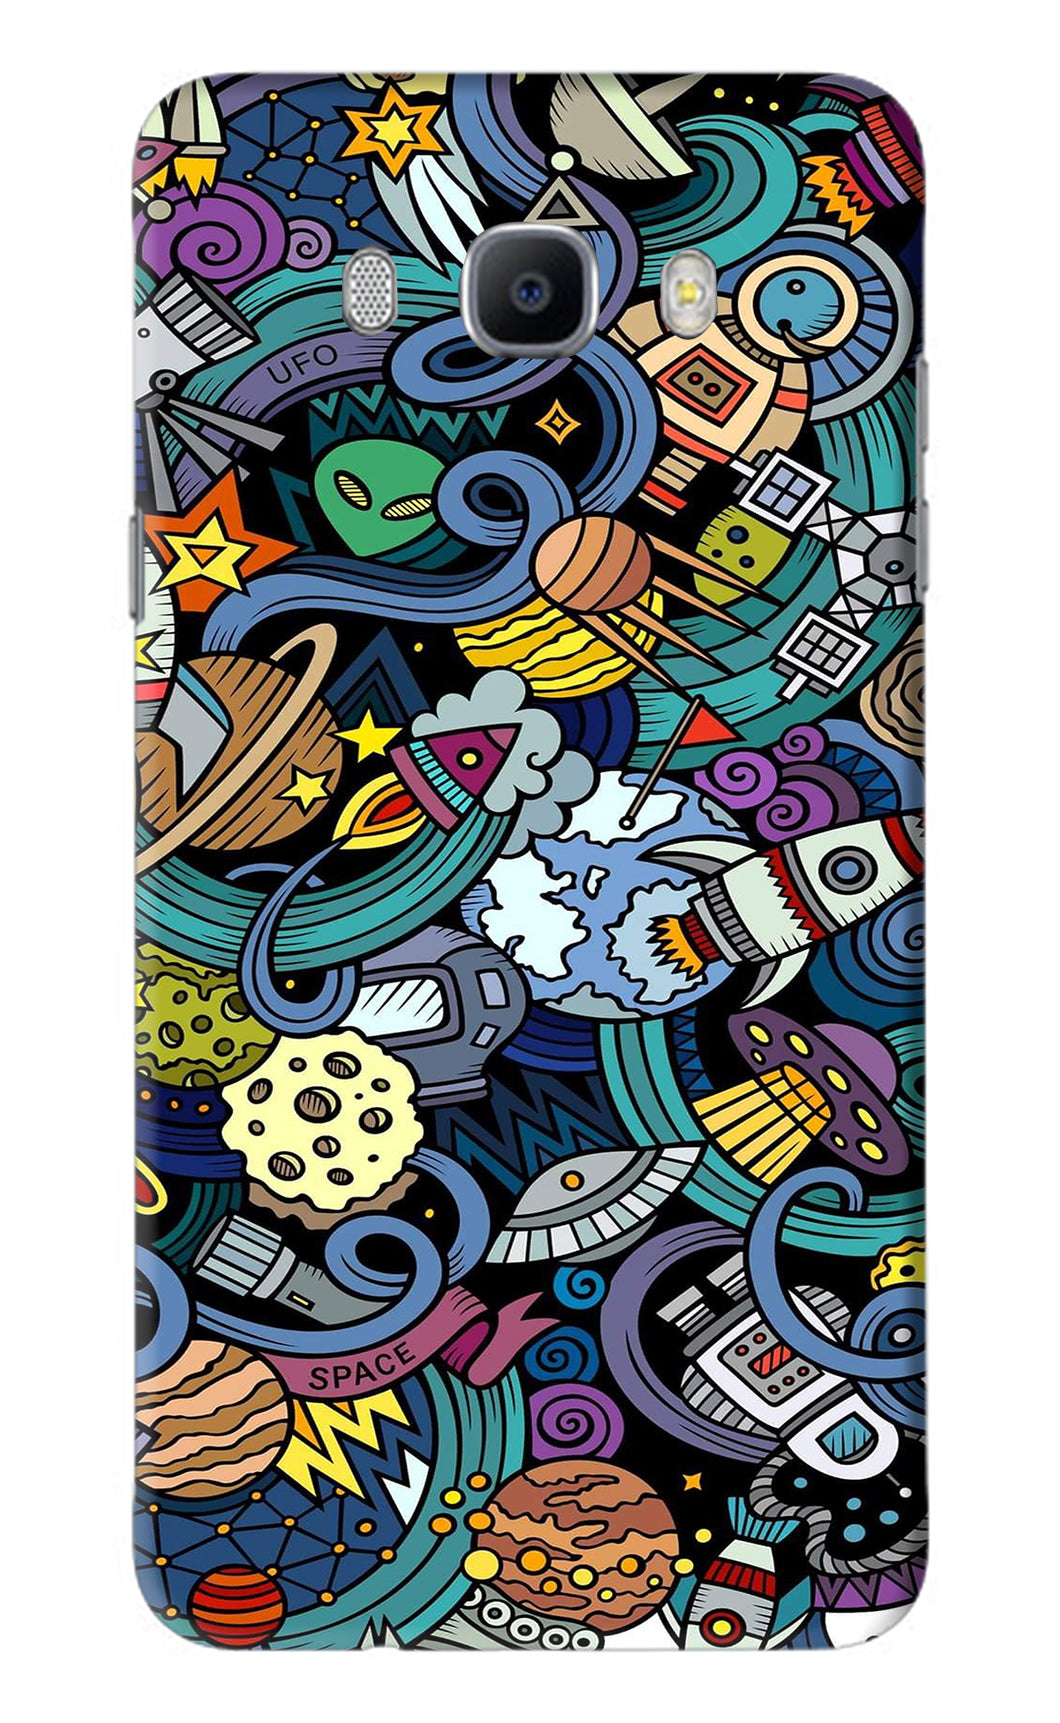 Space Abstract Samsung Galaxy J7 2016 Back Skin Wrap